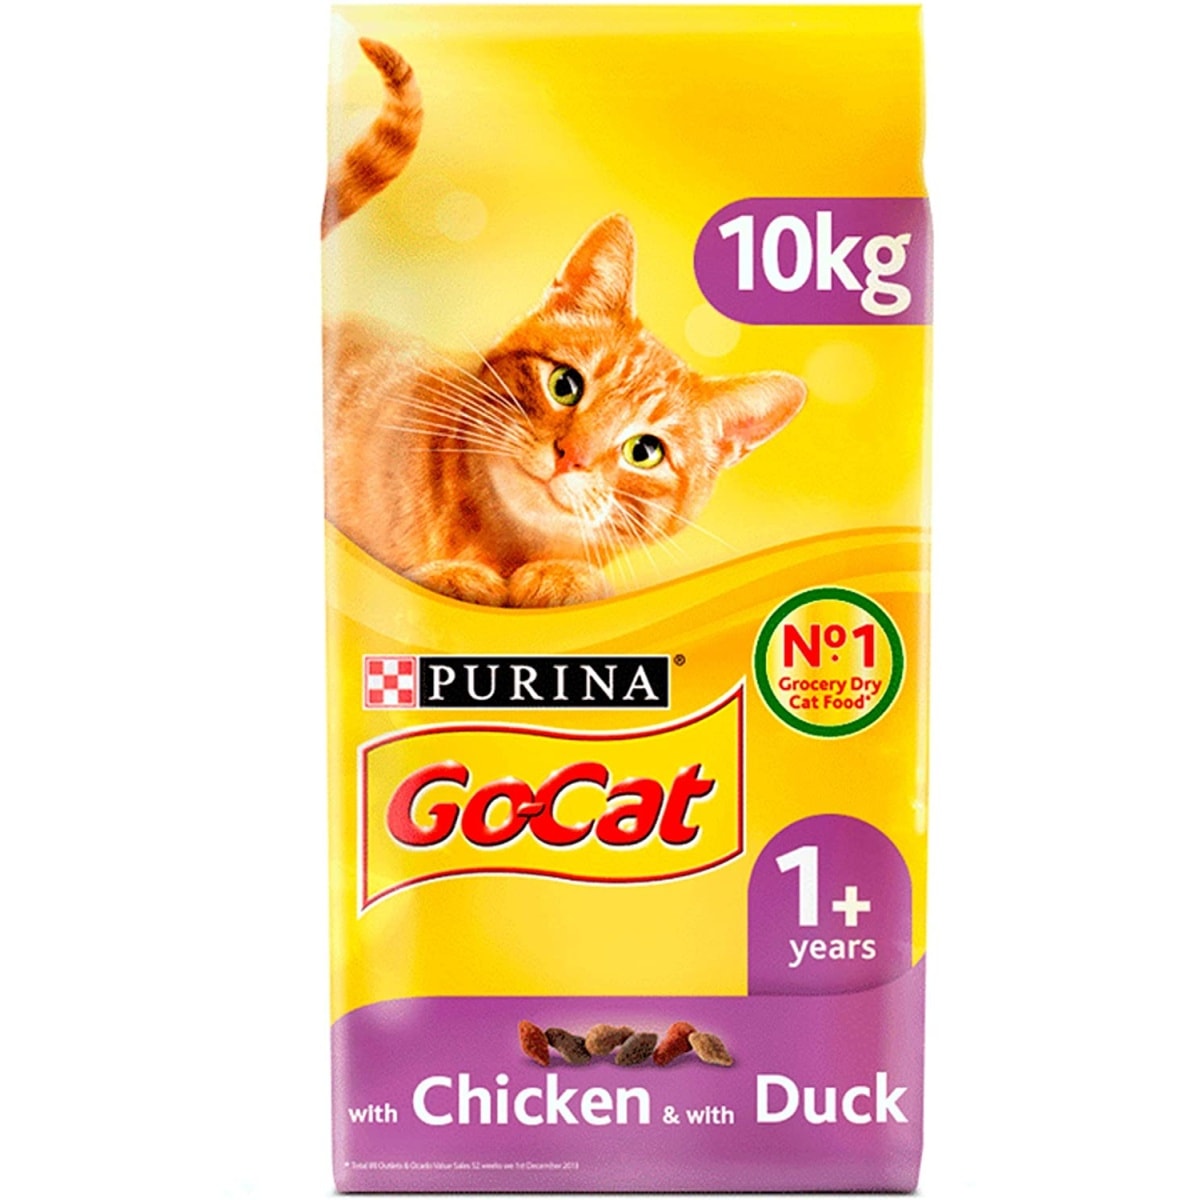 GO-CAT Chicken and Duck 10kg – Pawfect Supplies Ltd Product Image